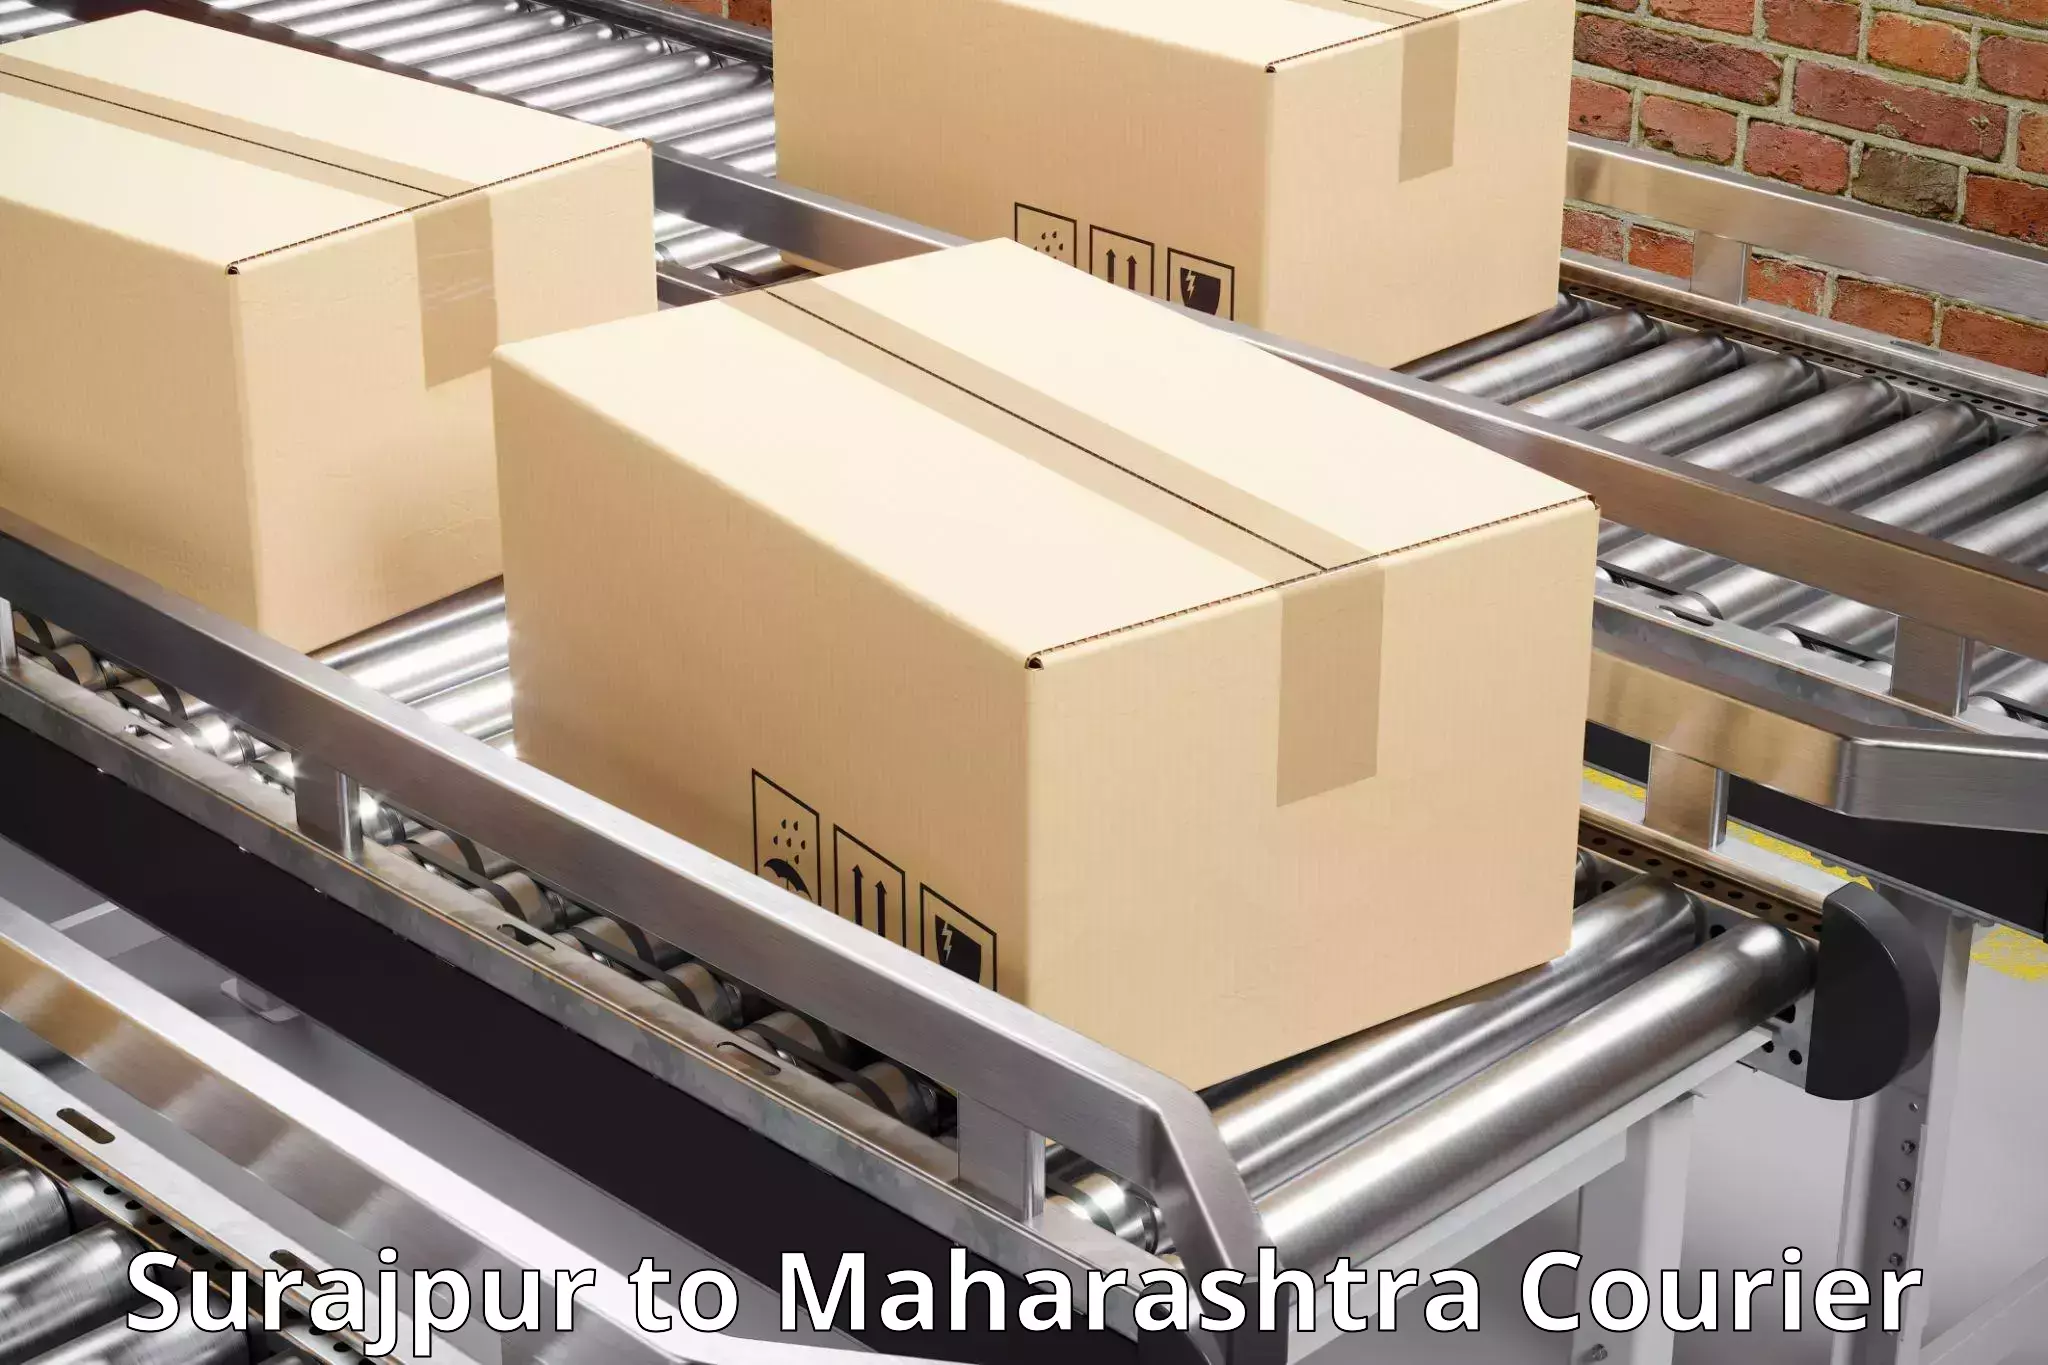 Large-scale shipping solutions Surajpur to Loni Ahmednagar